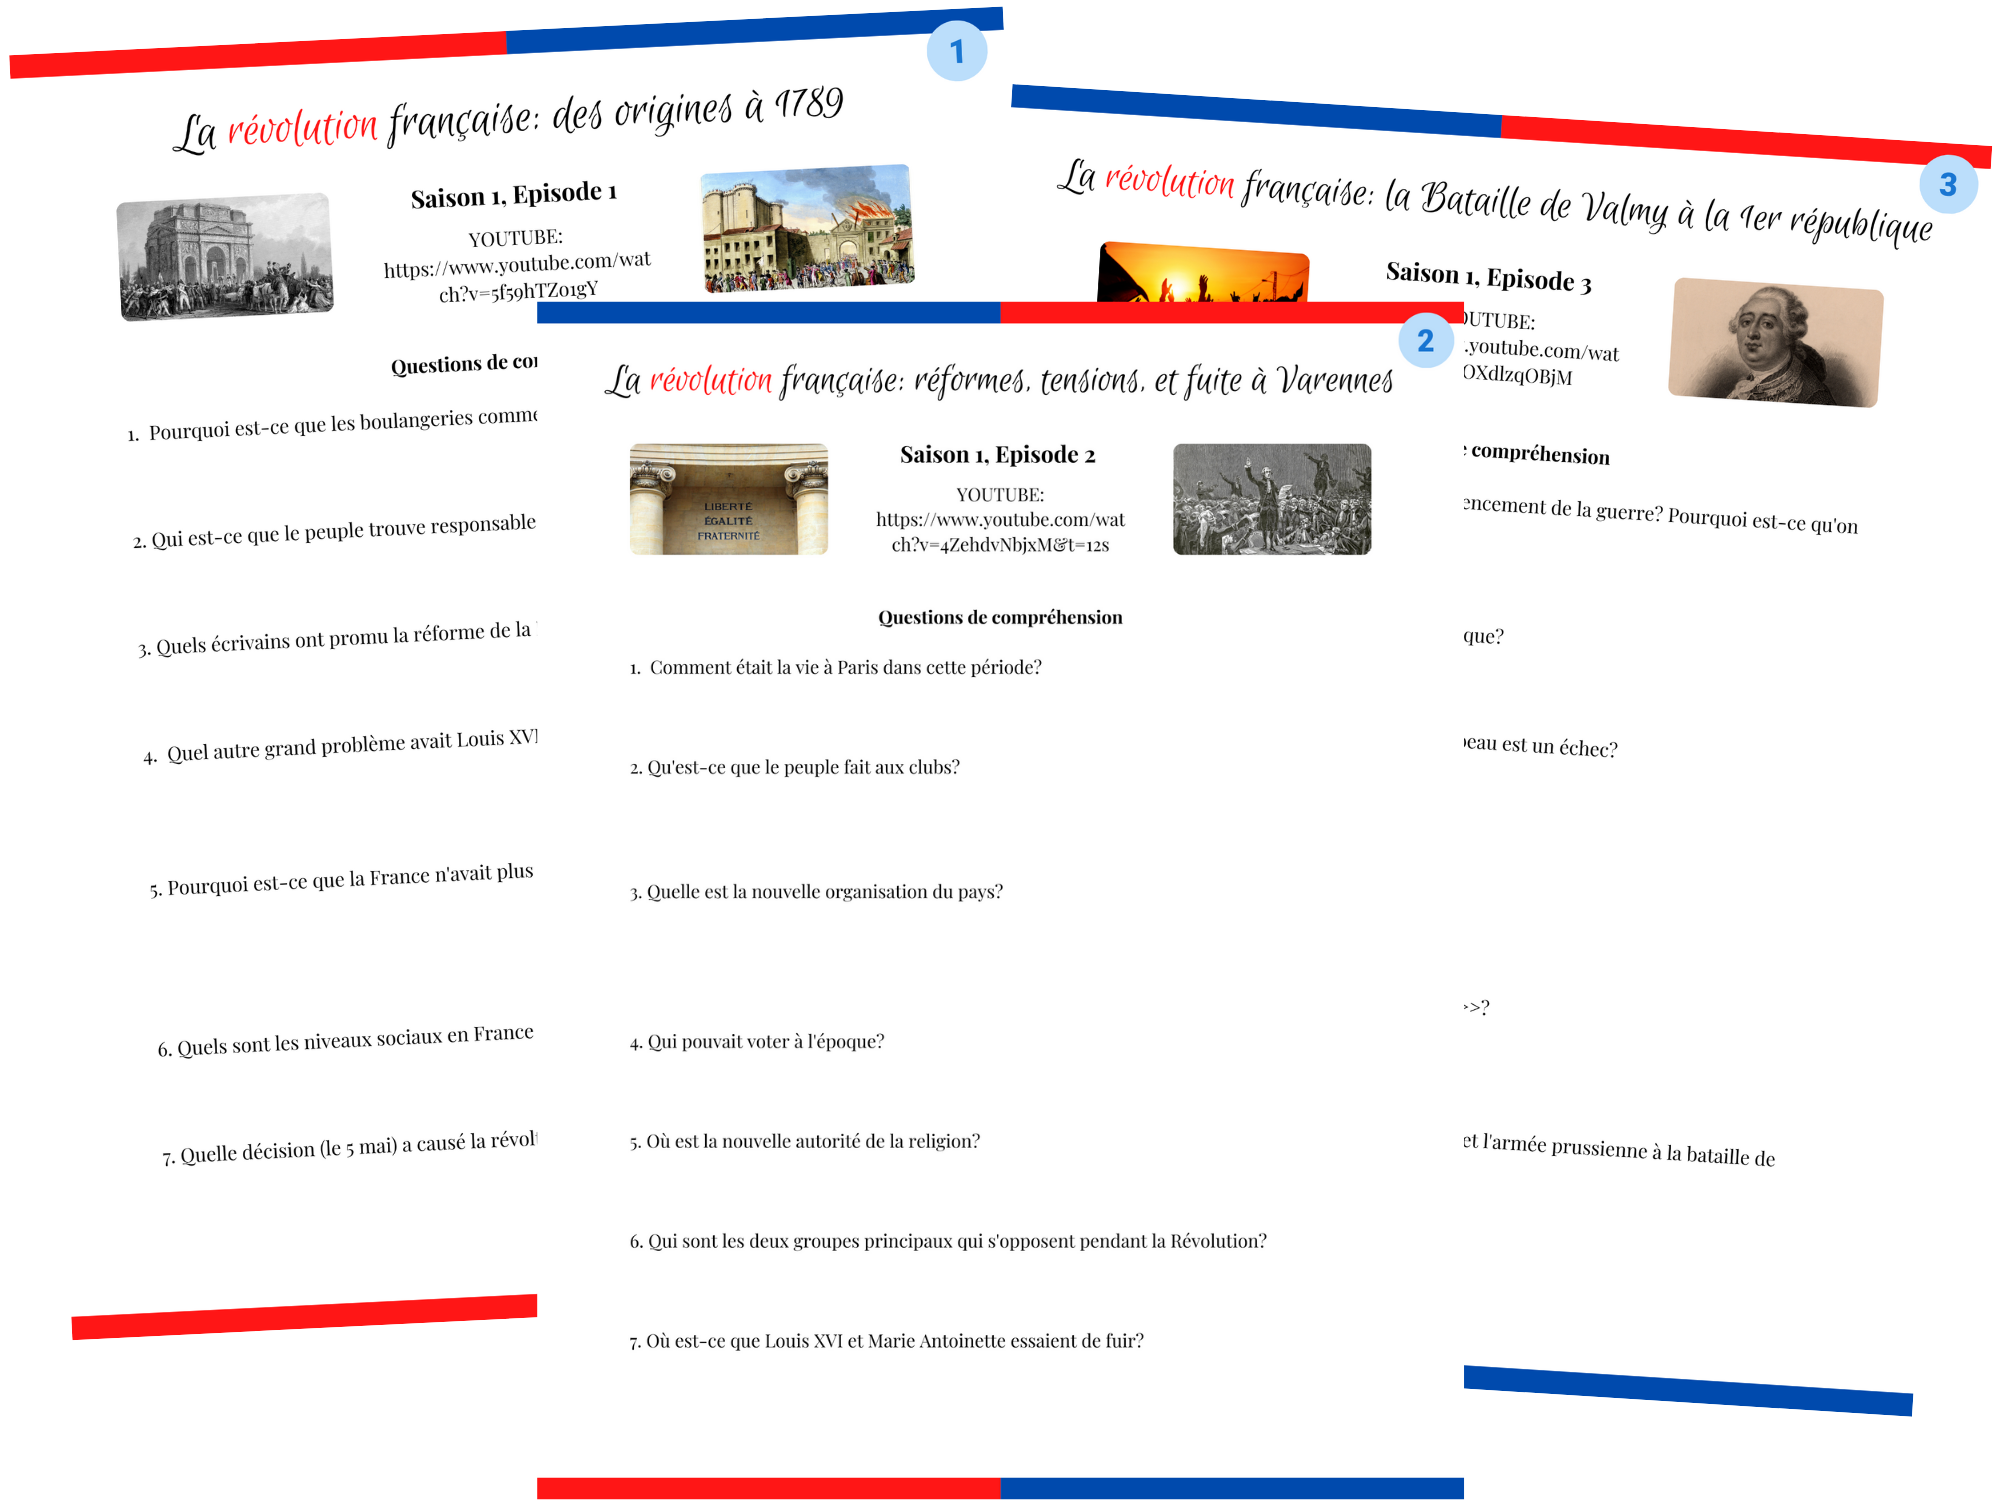 French Revolution Web series comprehension questions in French